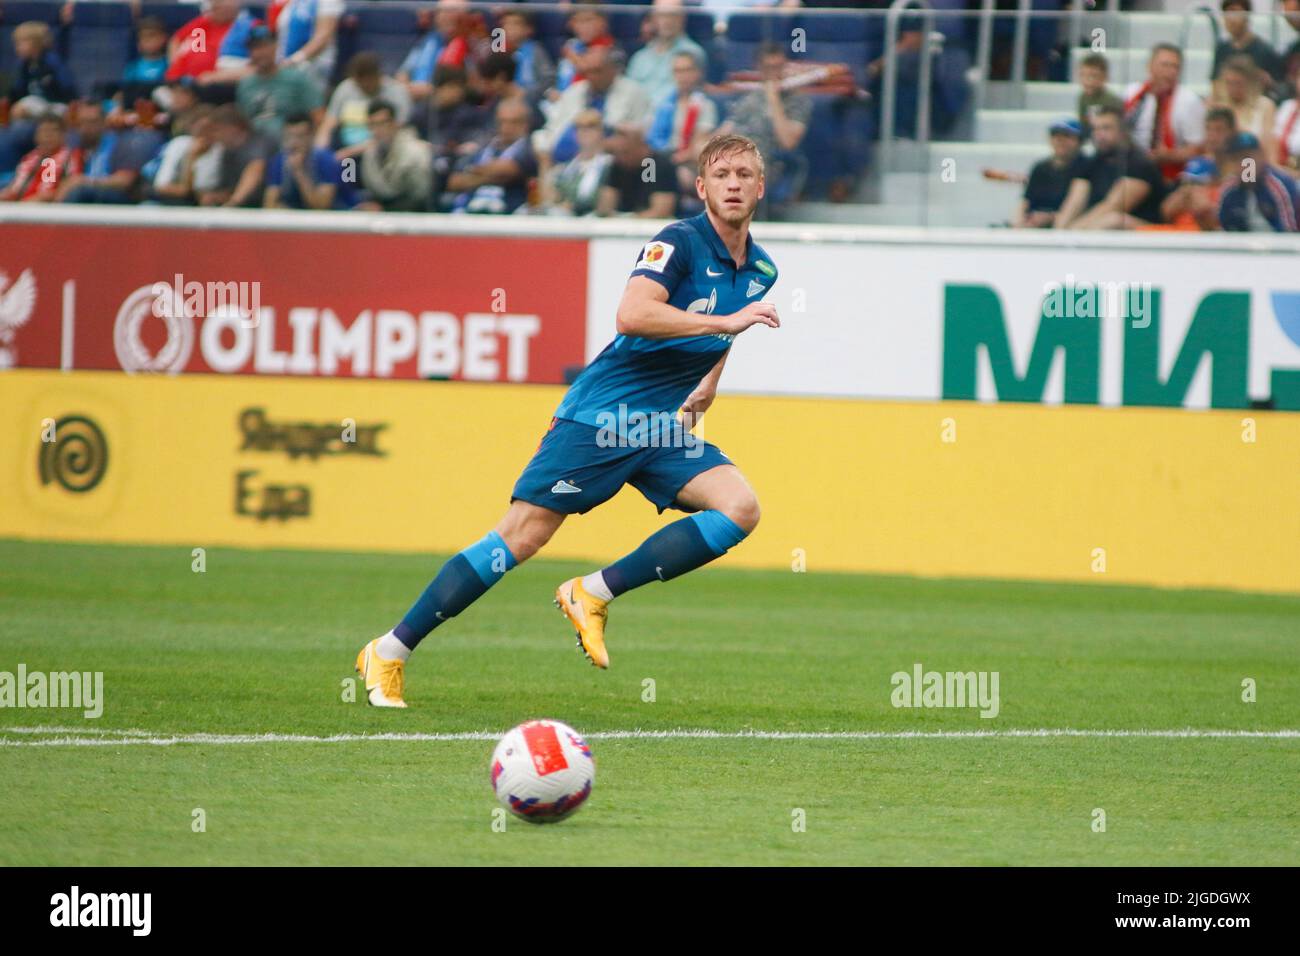 Saint Petersburg, Russia. 09th July, 2022. Dmitri Chistyakov (No.2) of Zenit seen during the Olimpbet Russian Football Super Cup football match between Zenit Saint Petersburg and Spartak Moscow at Gazprom Arena. Final score; Zenit 4:0 Spartak. (Photo by Maksim Konstantinov/SOPA Images/Sipa USA) Credit: Sipa USA/Alamy Live News Stock Photo